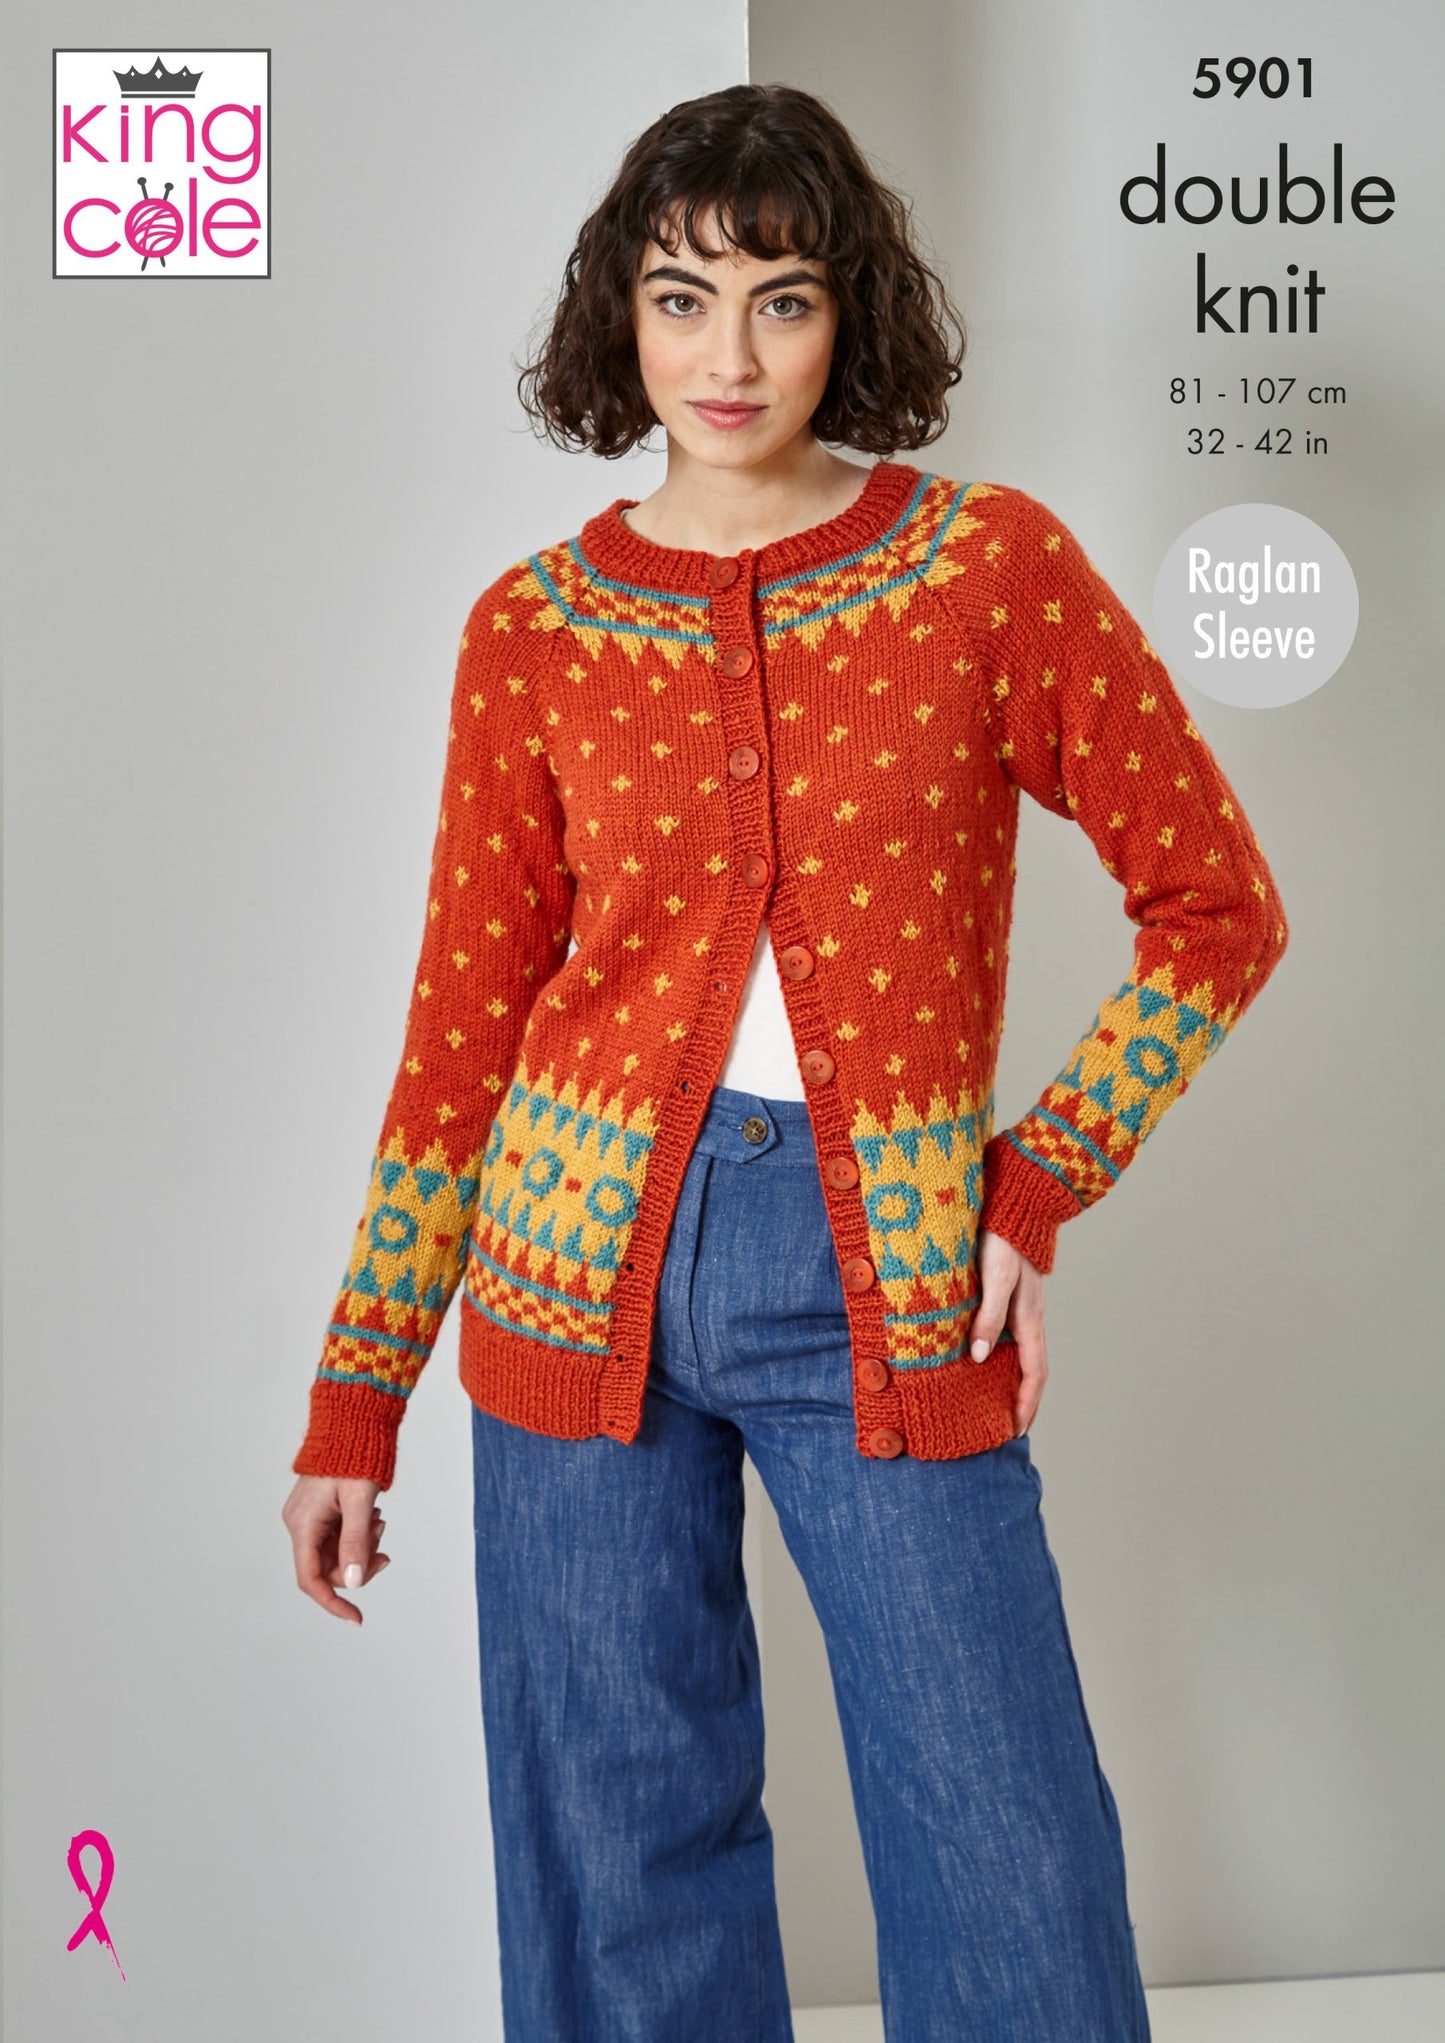 Knitting Pattern 5901 - Sweater and Cardigan: Knitted in King Cole Majestic DK